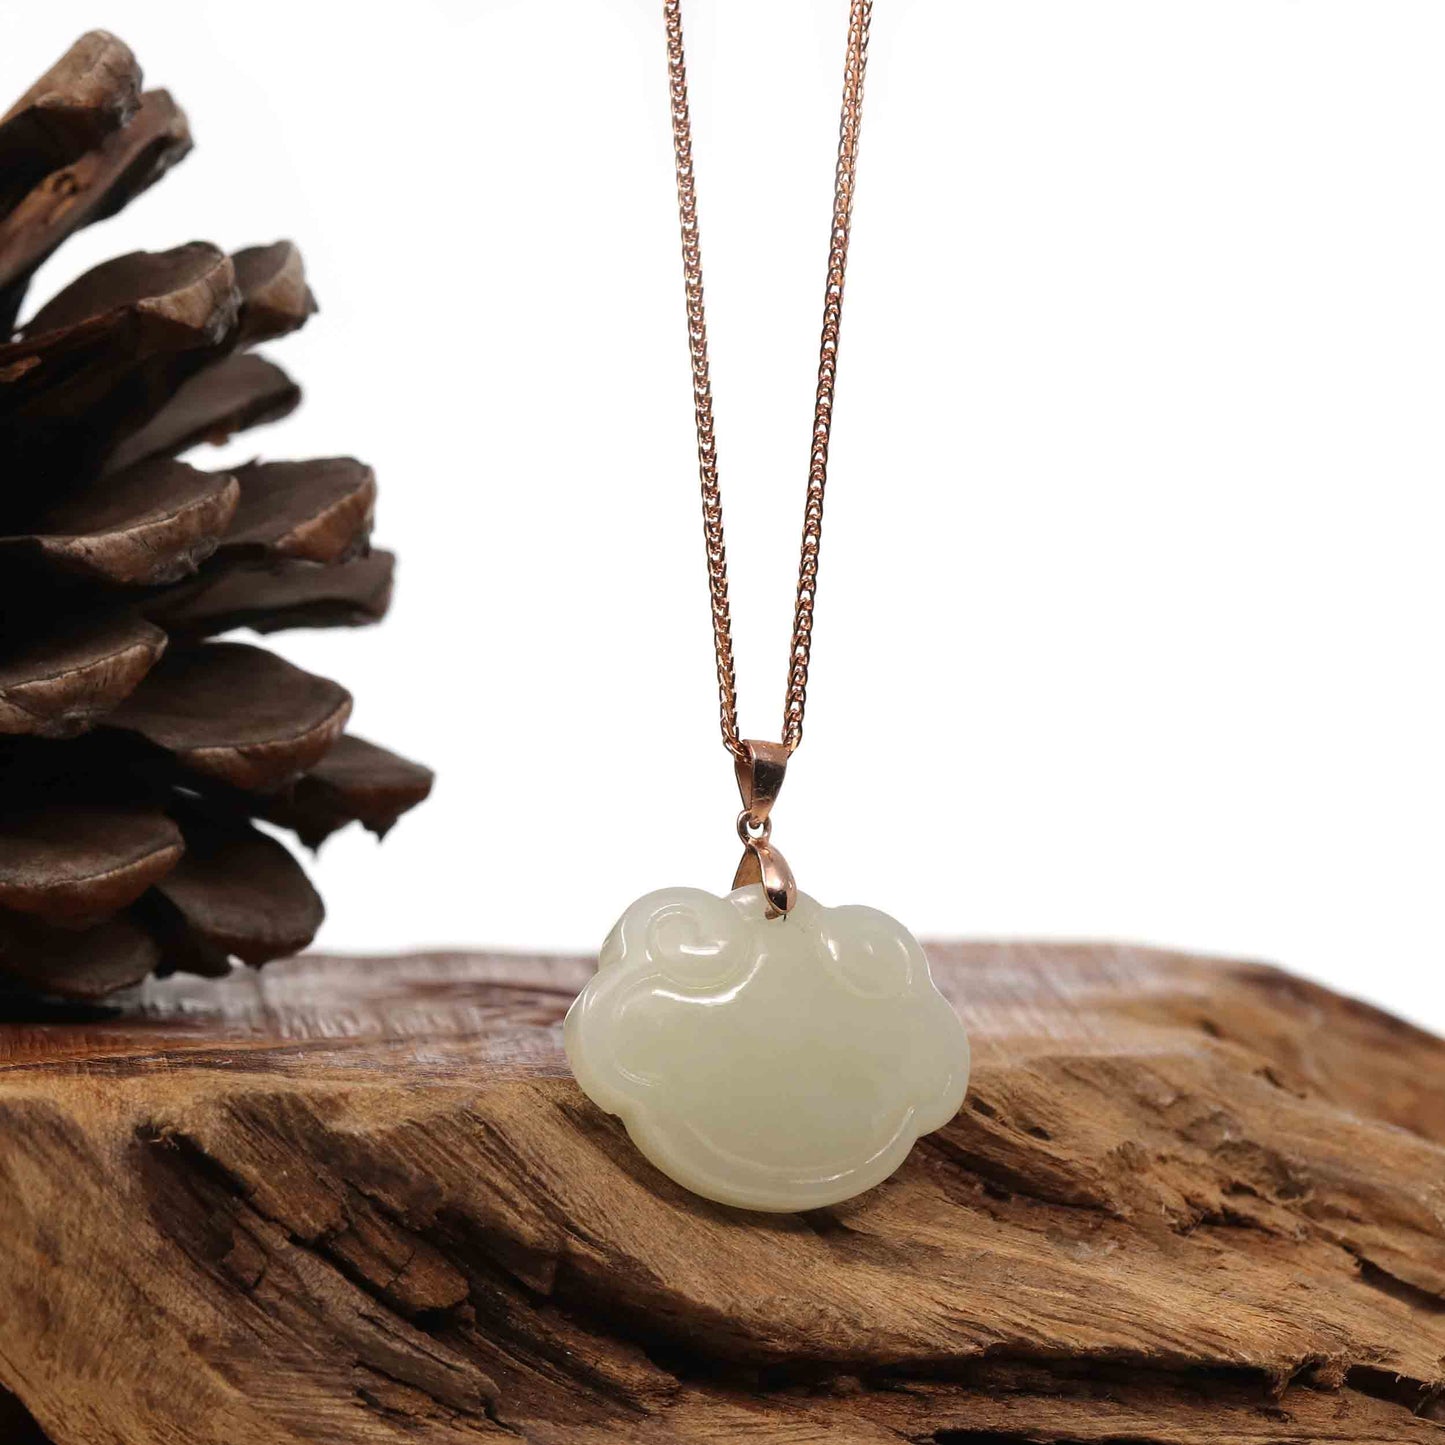 RealJade Co. Silver Gemstone Necklace Sterling Silver Genuine White Jade RuYi Pendant Necklace  with 18k Rose Gold Plated